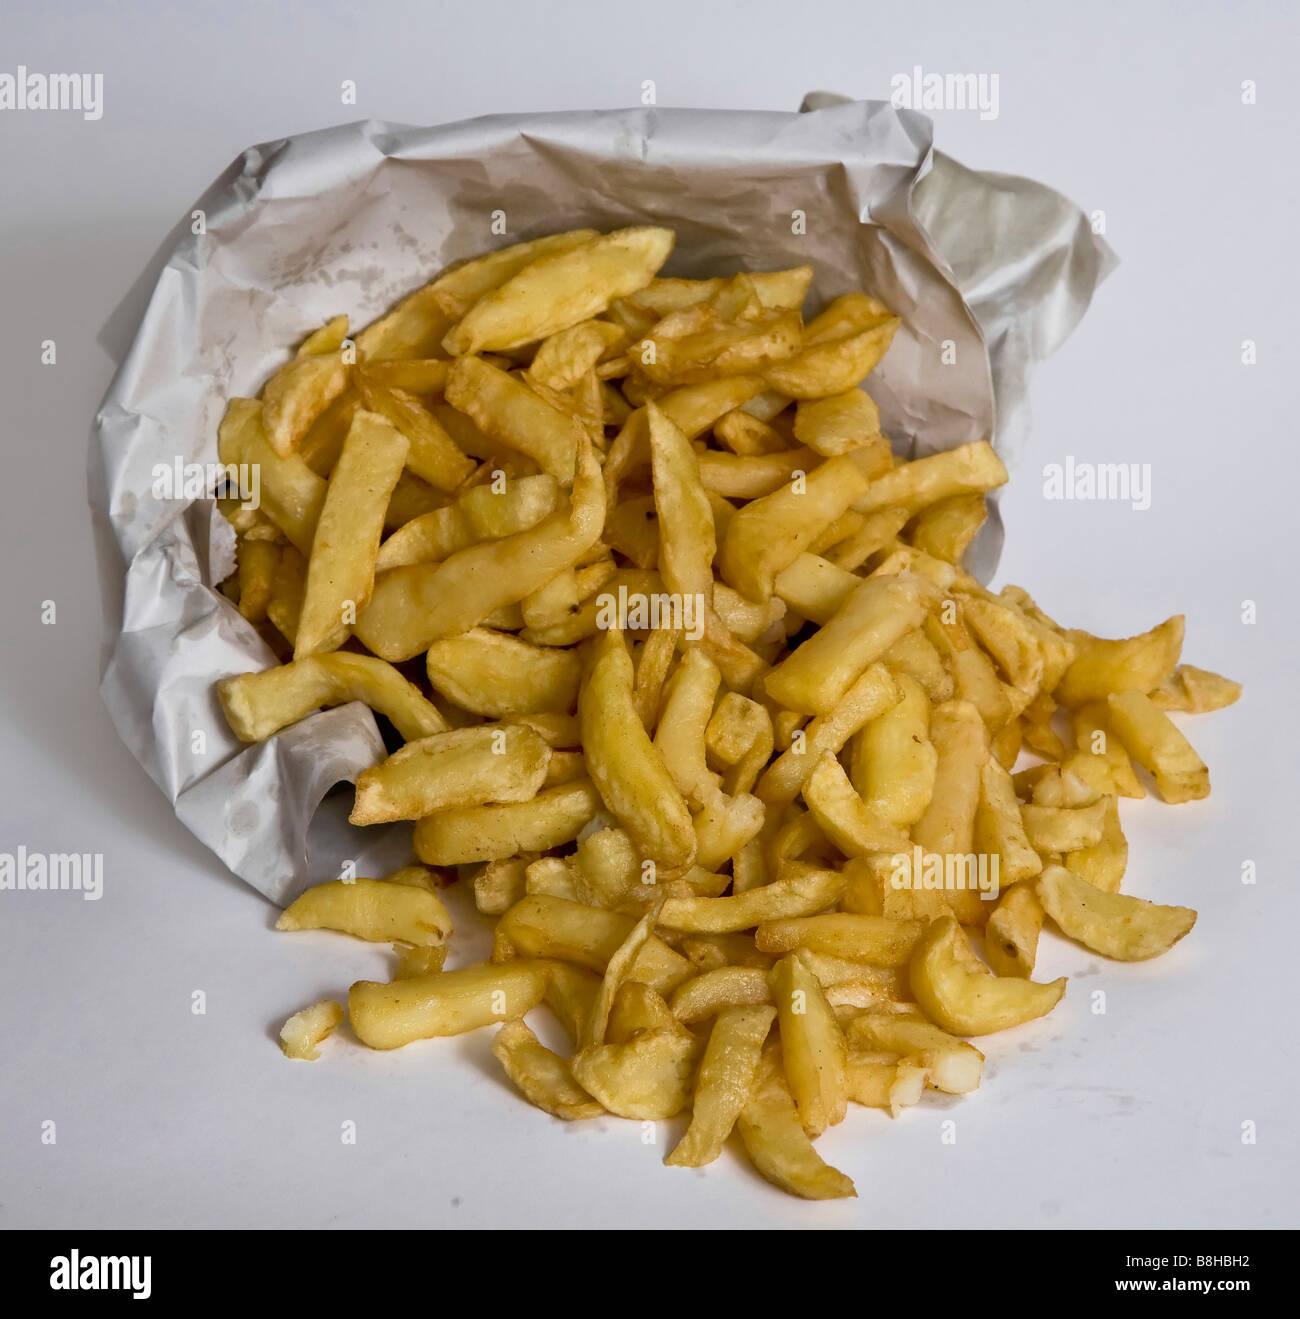 'junk food' chips 'bag of chips' Stock Photo